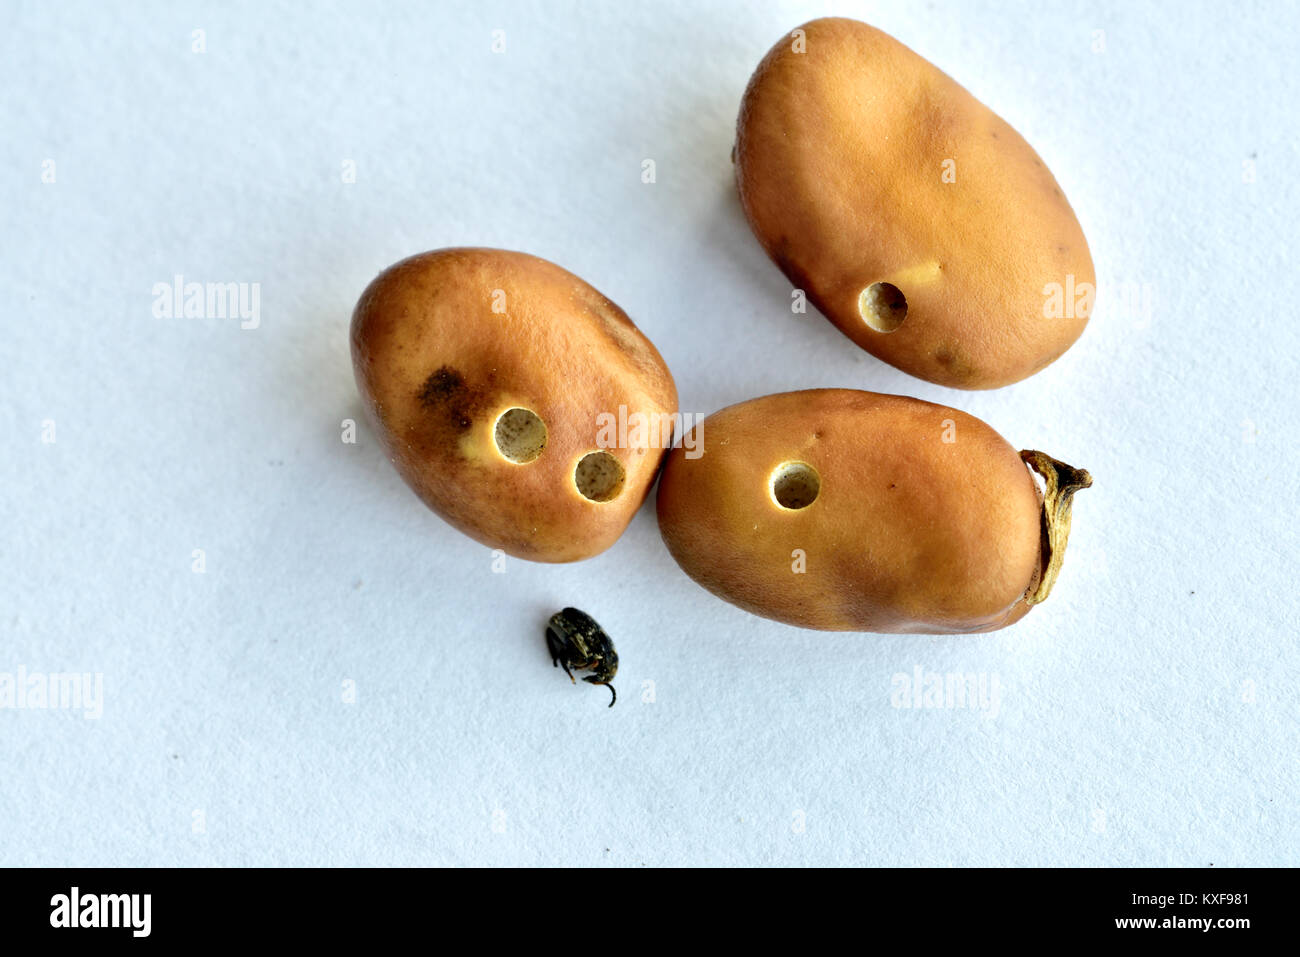 Dried broad bean or fava bean, a major food staple in some countries, showing holes produced by the bean seed beetle with a dead beetle Stock Photo